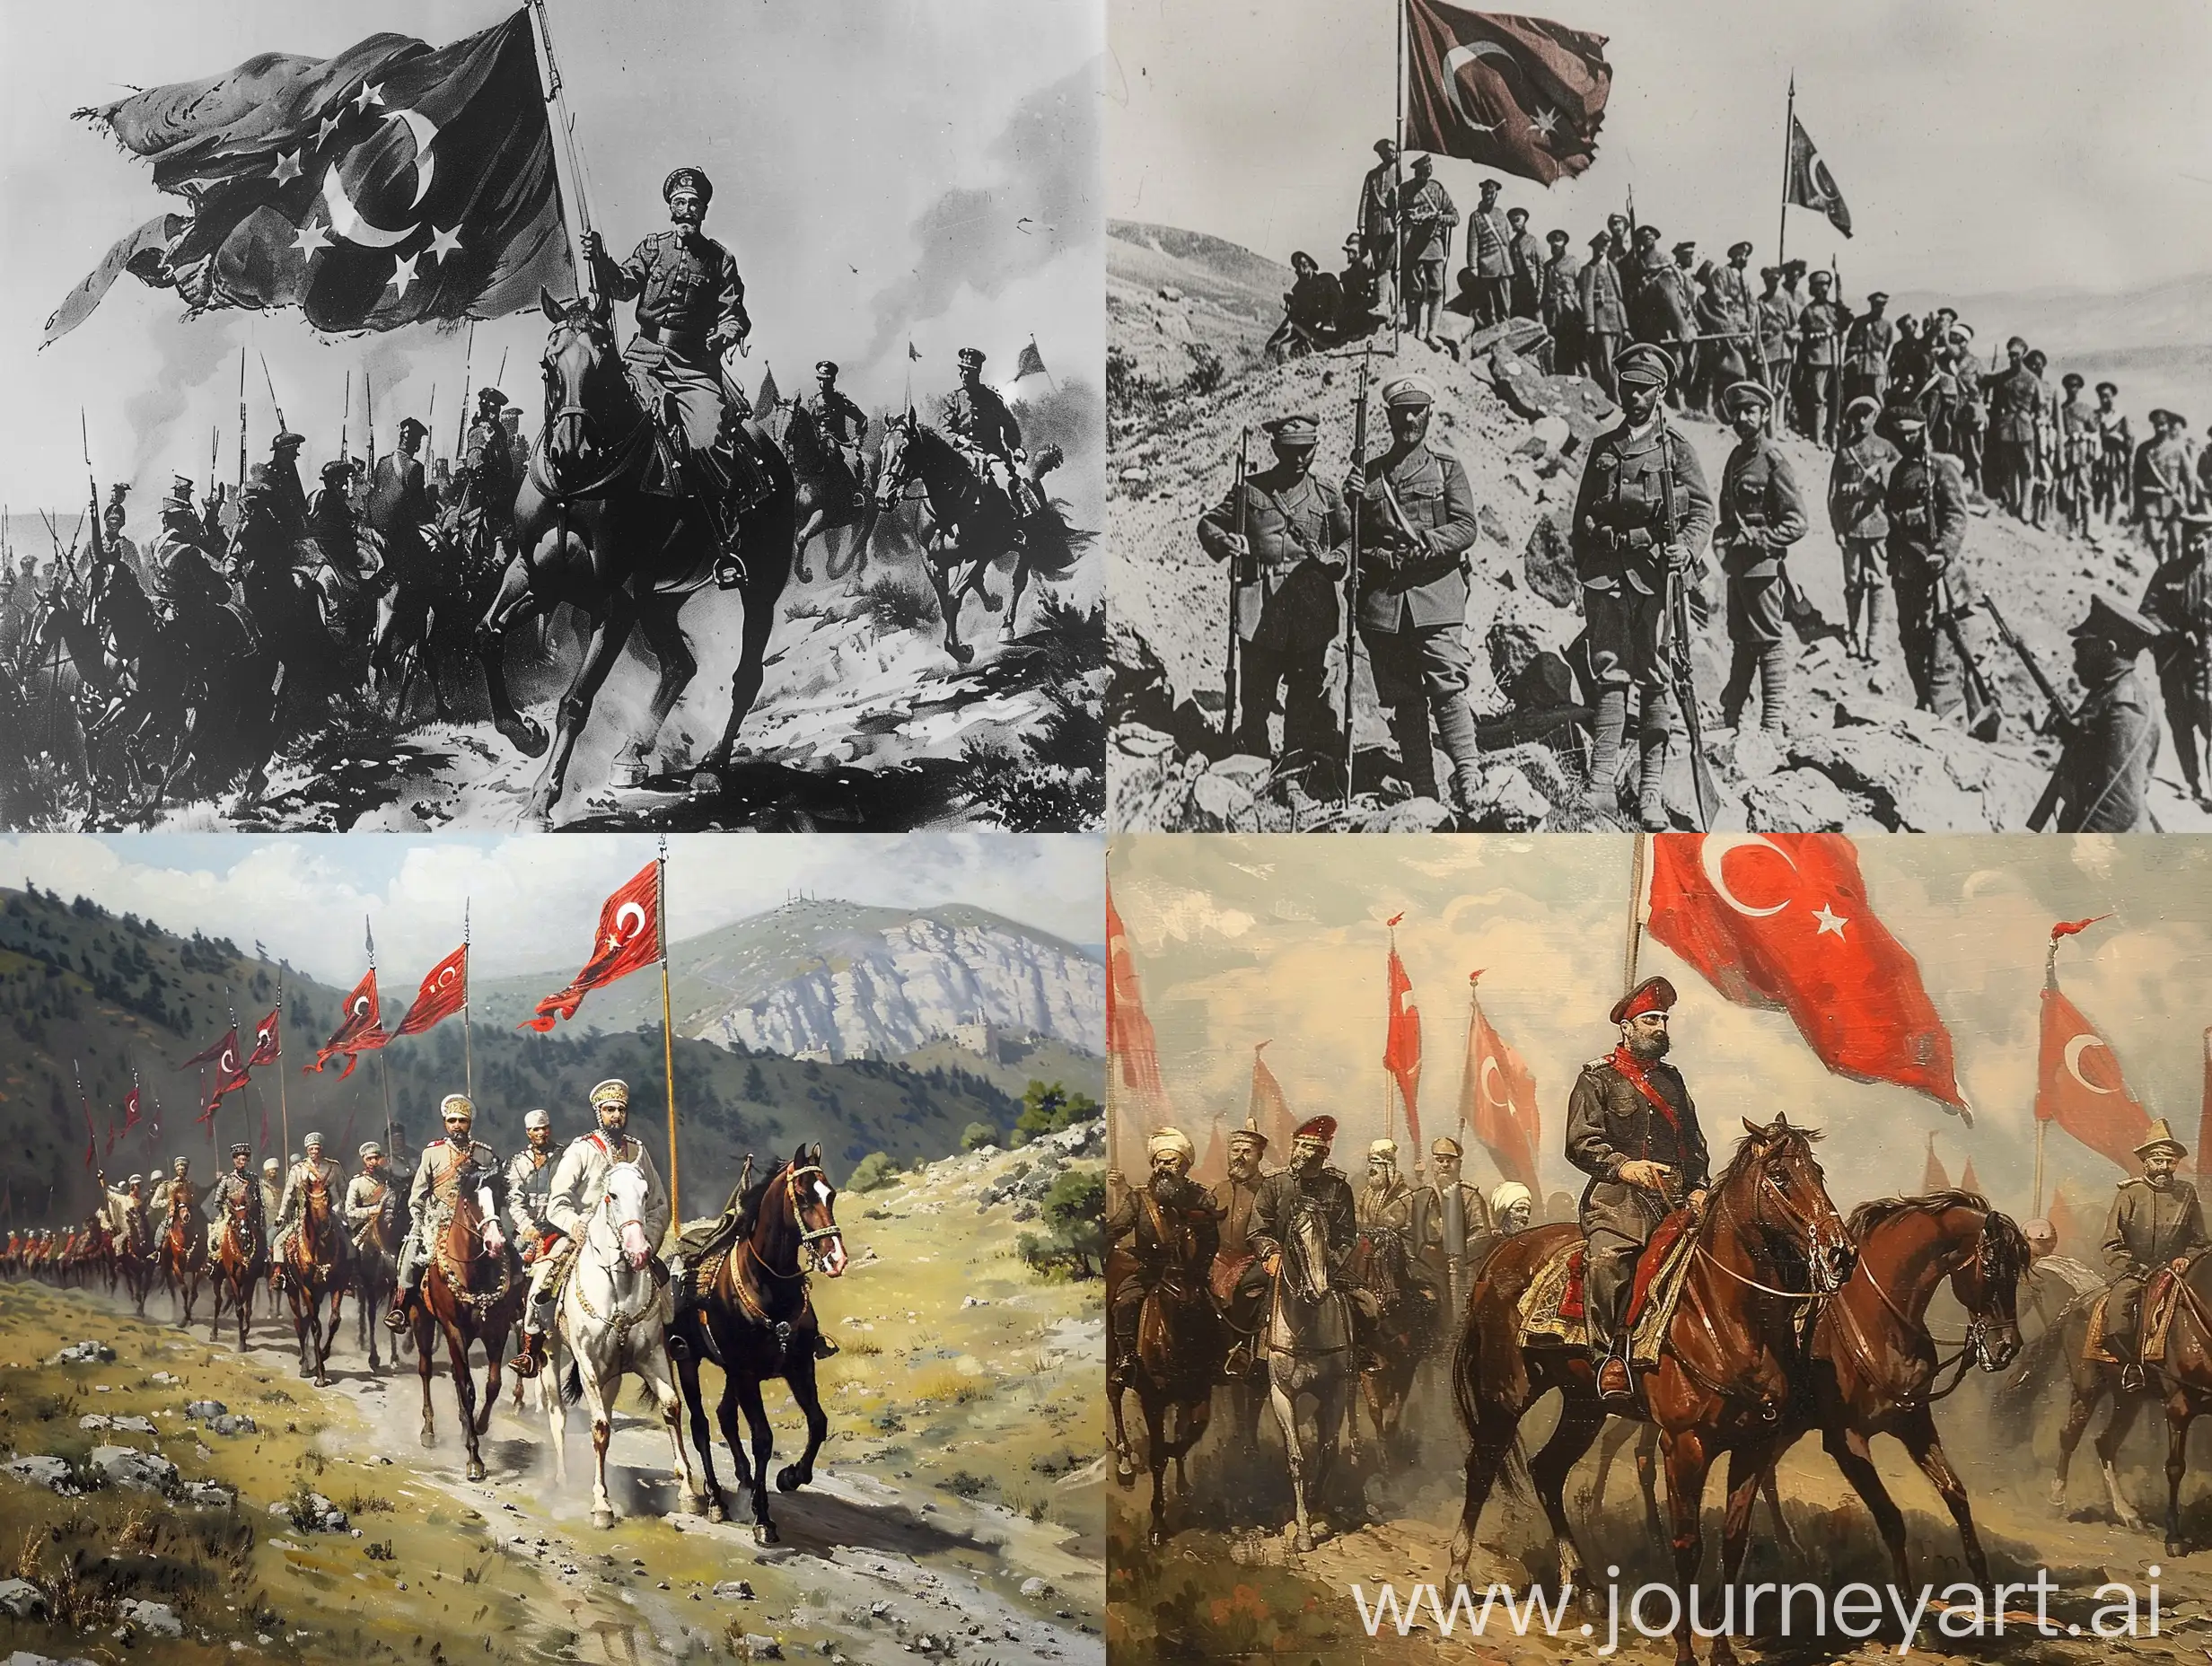 Every segment of Turkish society, from the Ottoman government to the Turkish nationalists led by Mustafa Kemal Pasha, resisted the occupation. A new Turkish National Movement centered in Central Anatolia was born to counter the foreign forces remaining in Anatolia. The Allies, in turn, gave the Greek army the task of ending the Turkish Nationalist government.